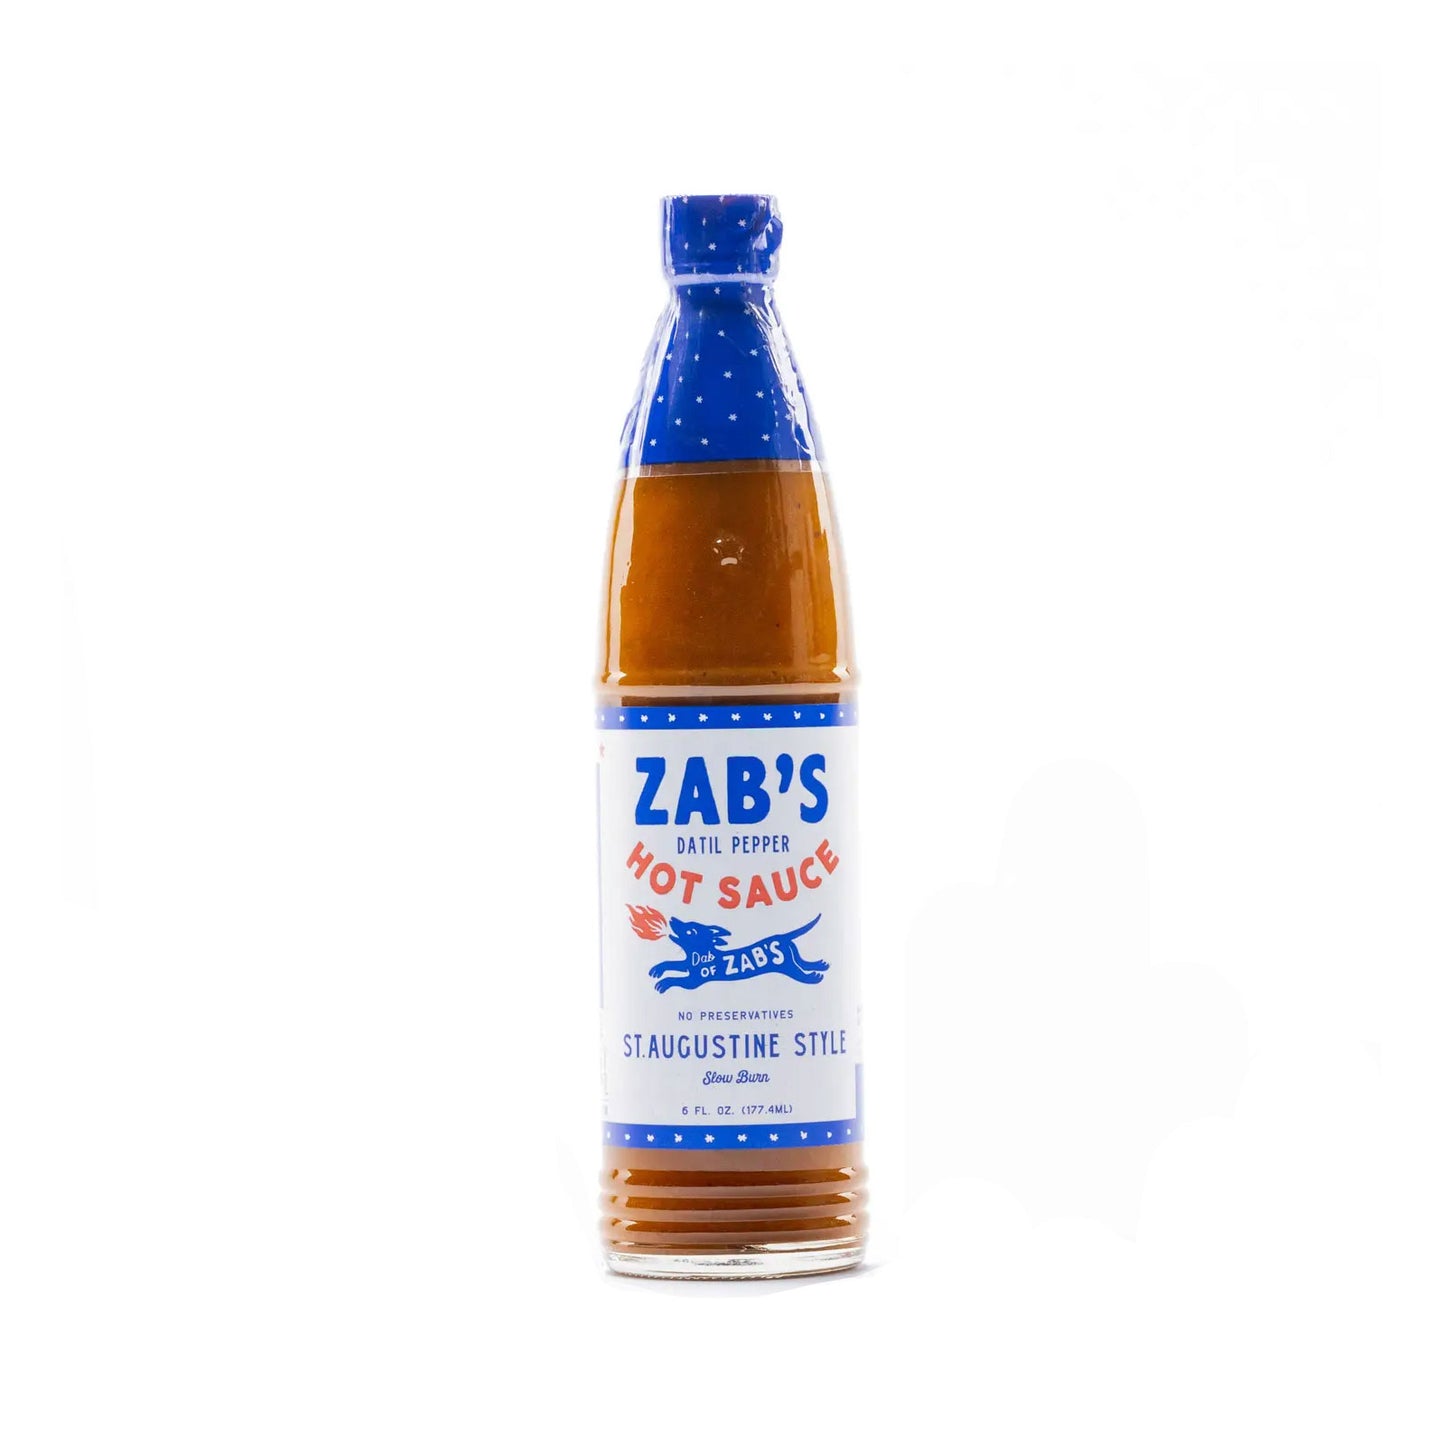 Zab's St. Augustine Style Hot Sauce